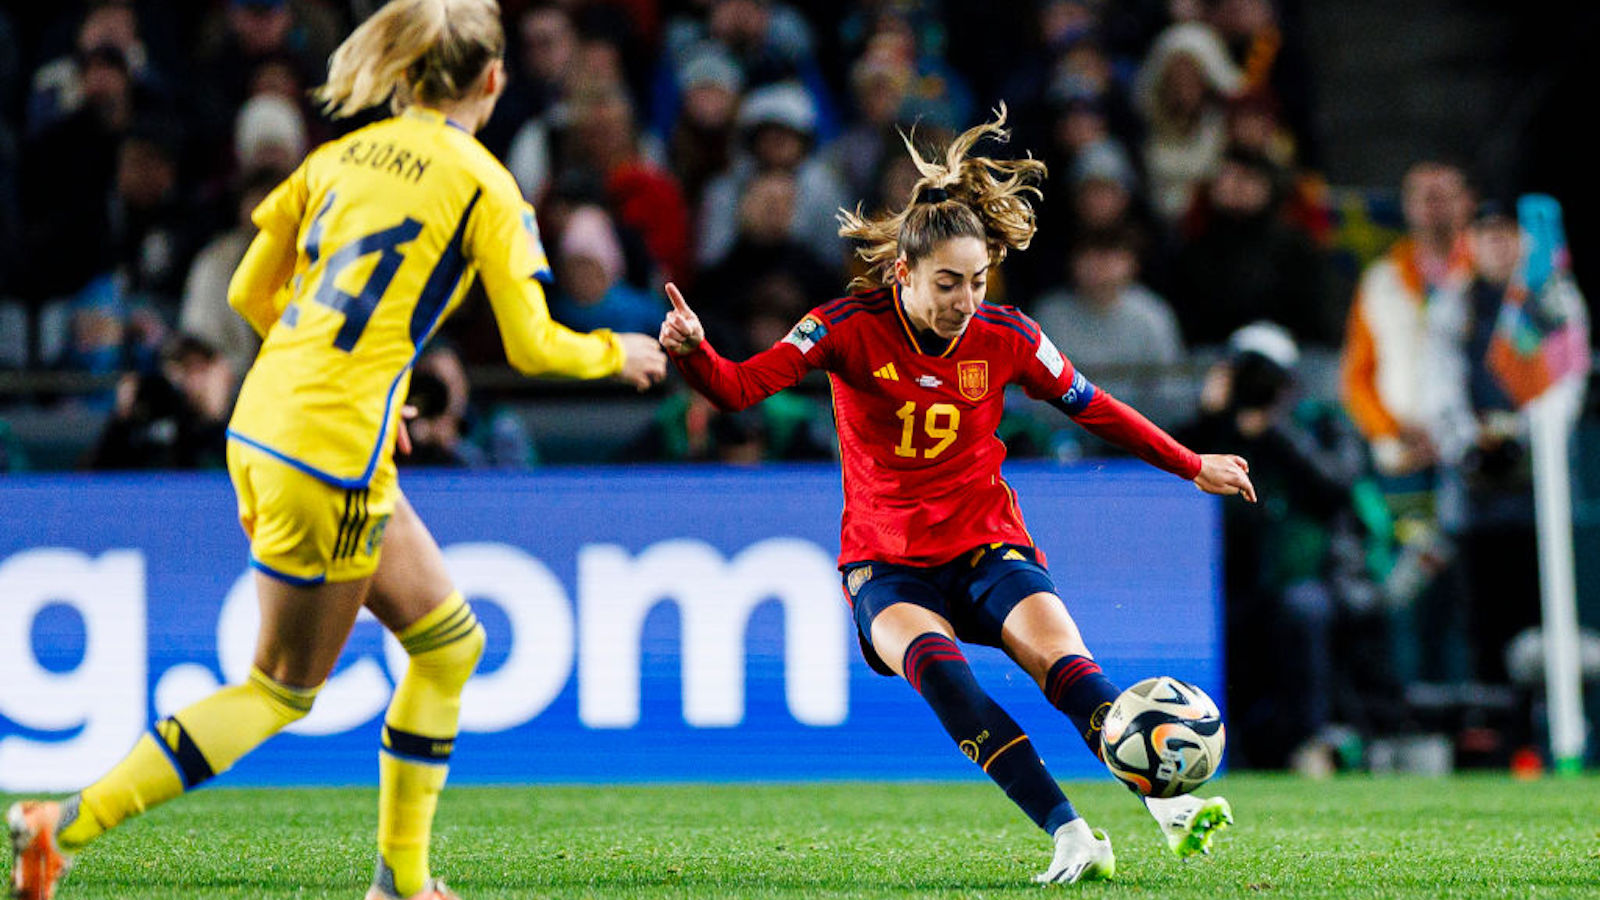 Olga Carmona of Spain (R) attempts a kick while being defended by Nathalie Bjorn of Sweden (L) during the FIFA Women's World Cup Australia &amp; New Zealand 2023 Semi Final match between Spain and Sweden at Eden Park on August 15, 2023 in Auckland, New Zealand.